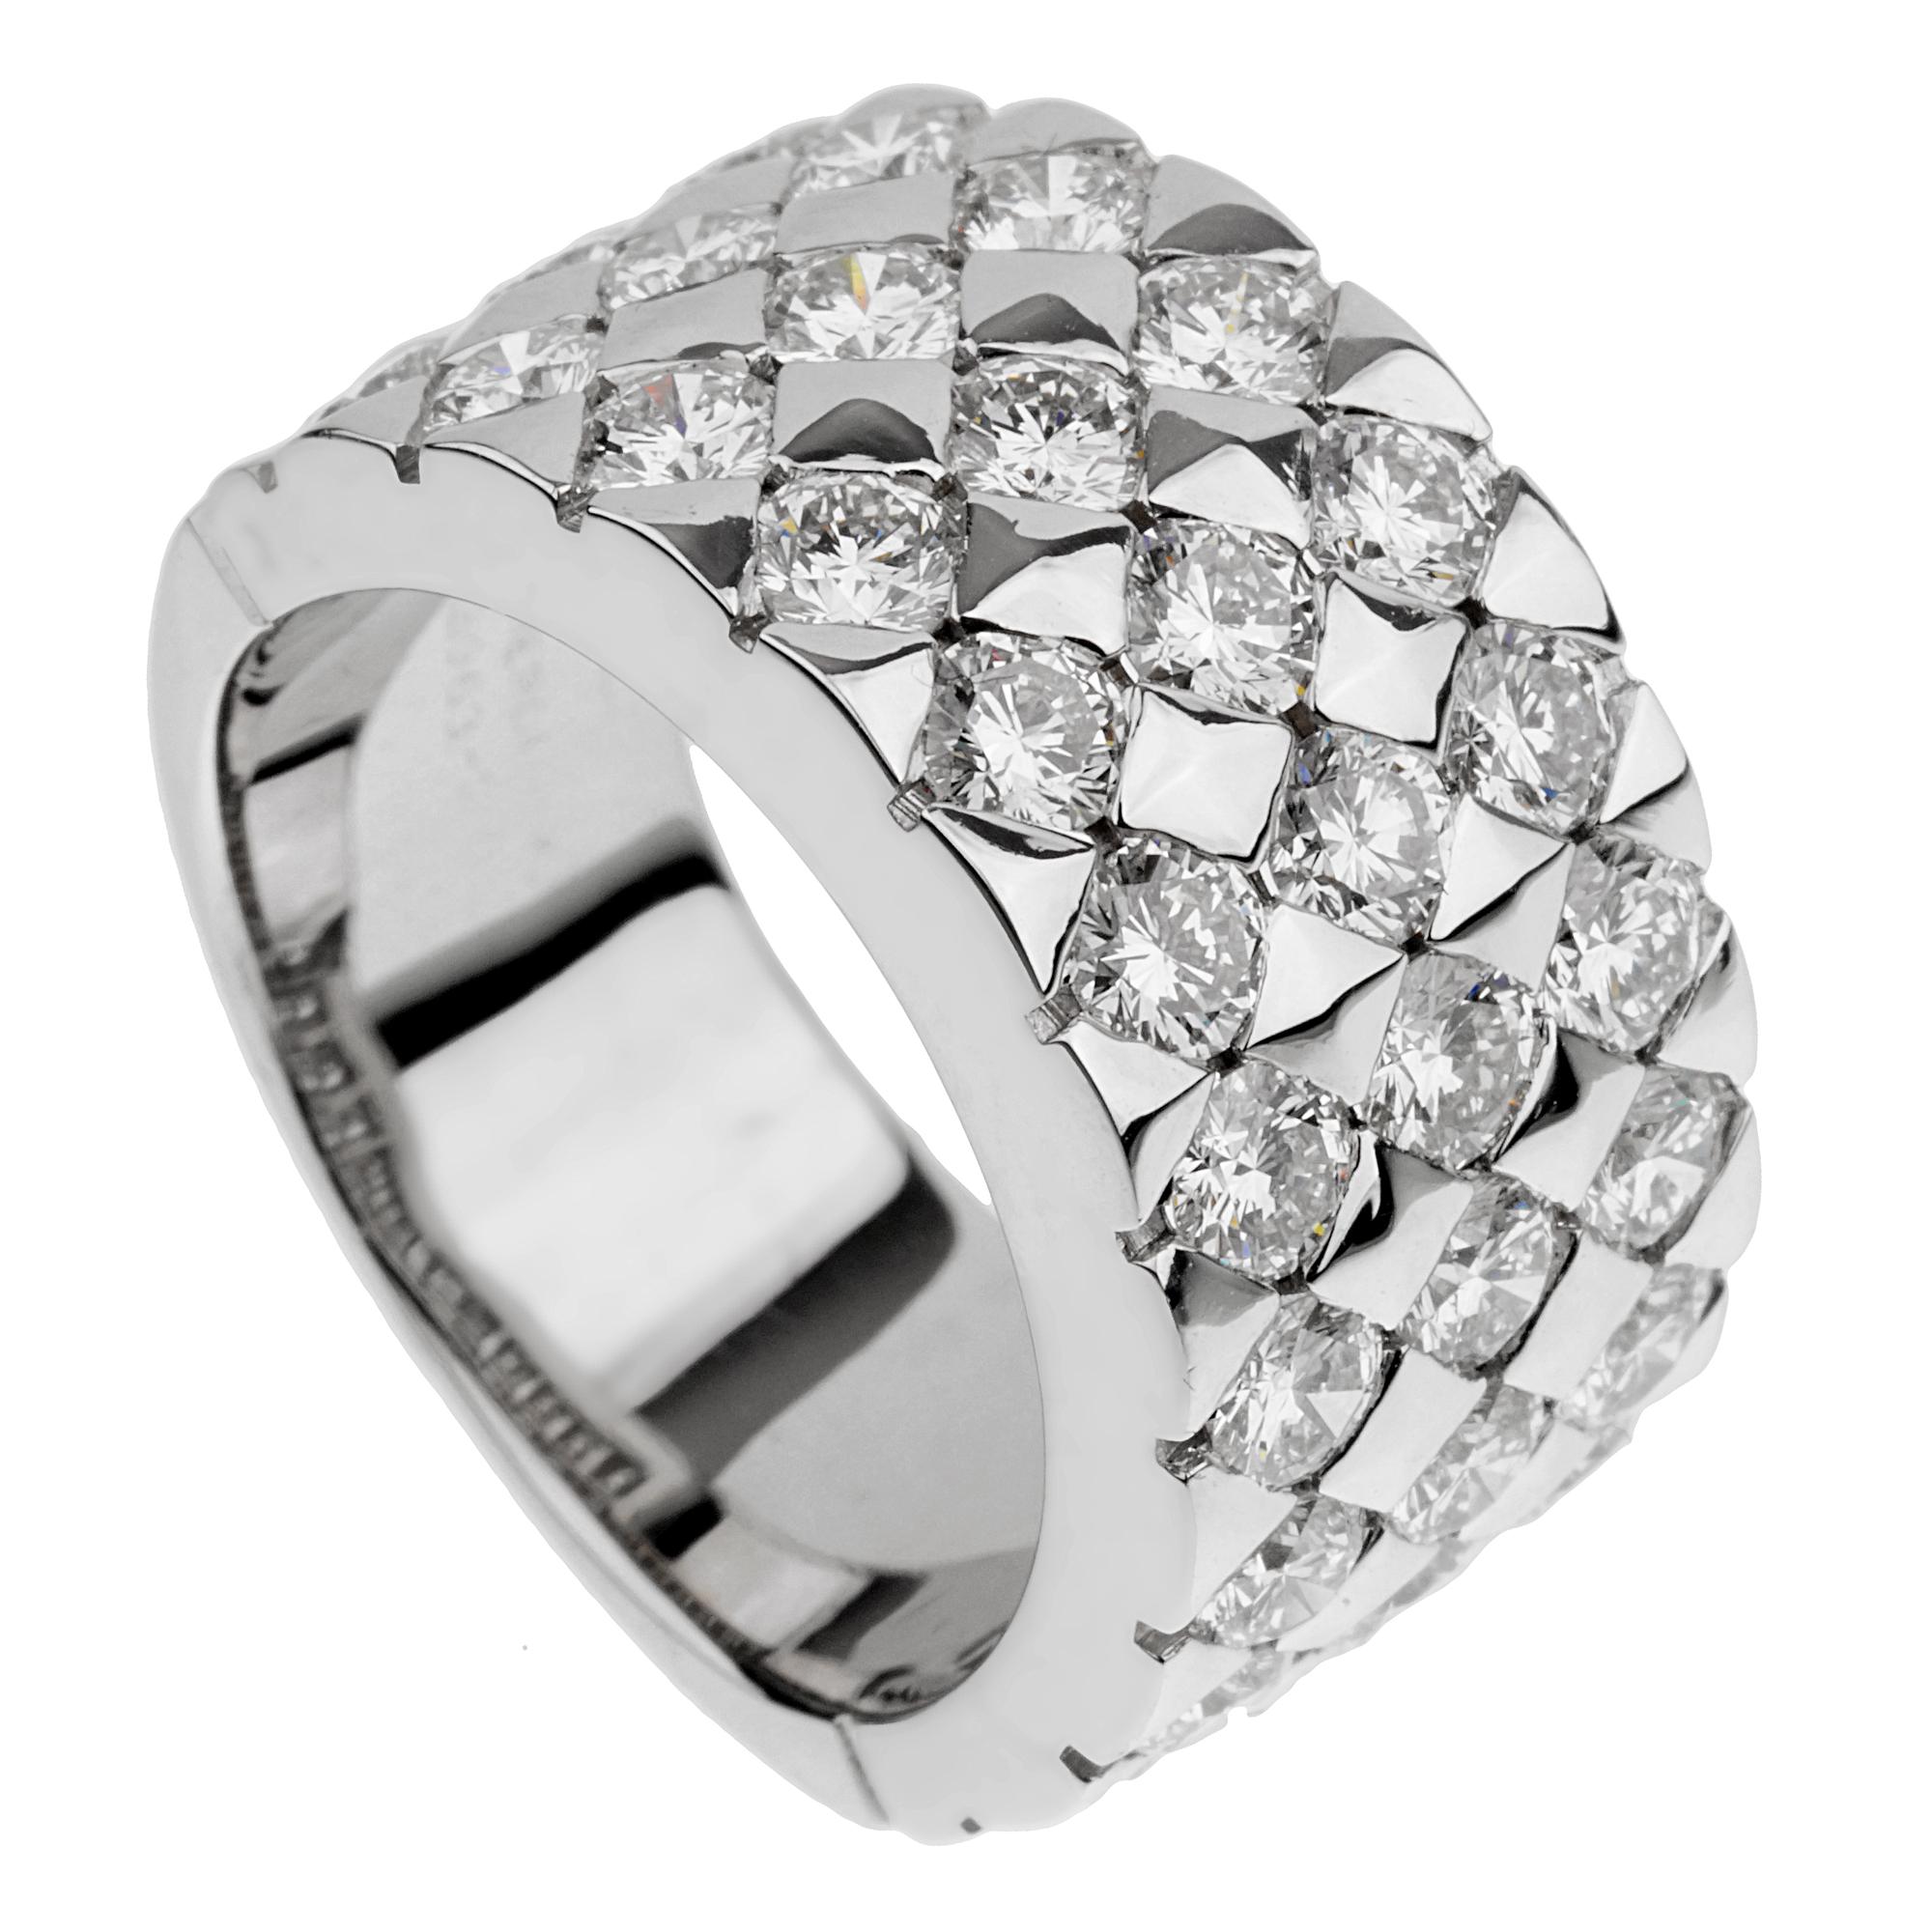 A fabulous authentic Boucheron diamond ring showcasing 33 of the finest round brilliant cut diamonds set in 18k white gold. The diamonds are securely set in a square motif to ensure a chic and everlasting look. The ring measures a size 6 3/4 and can